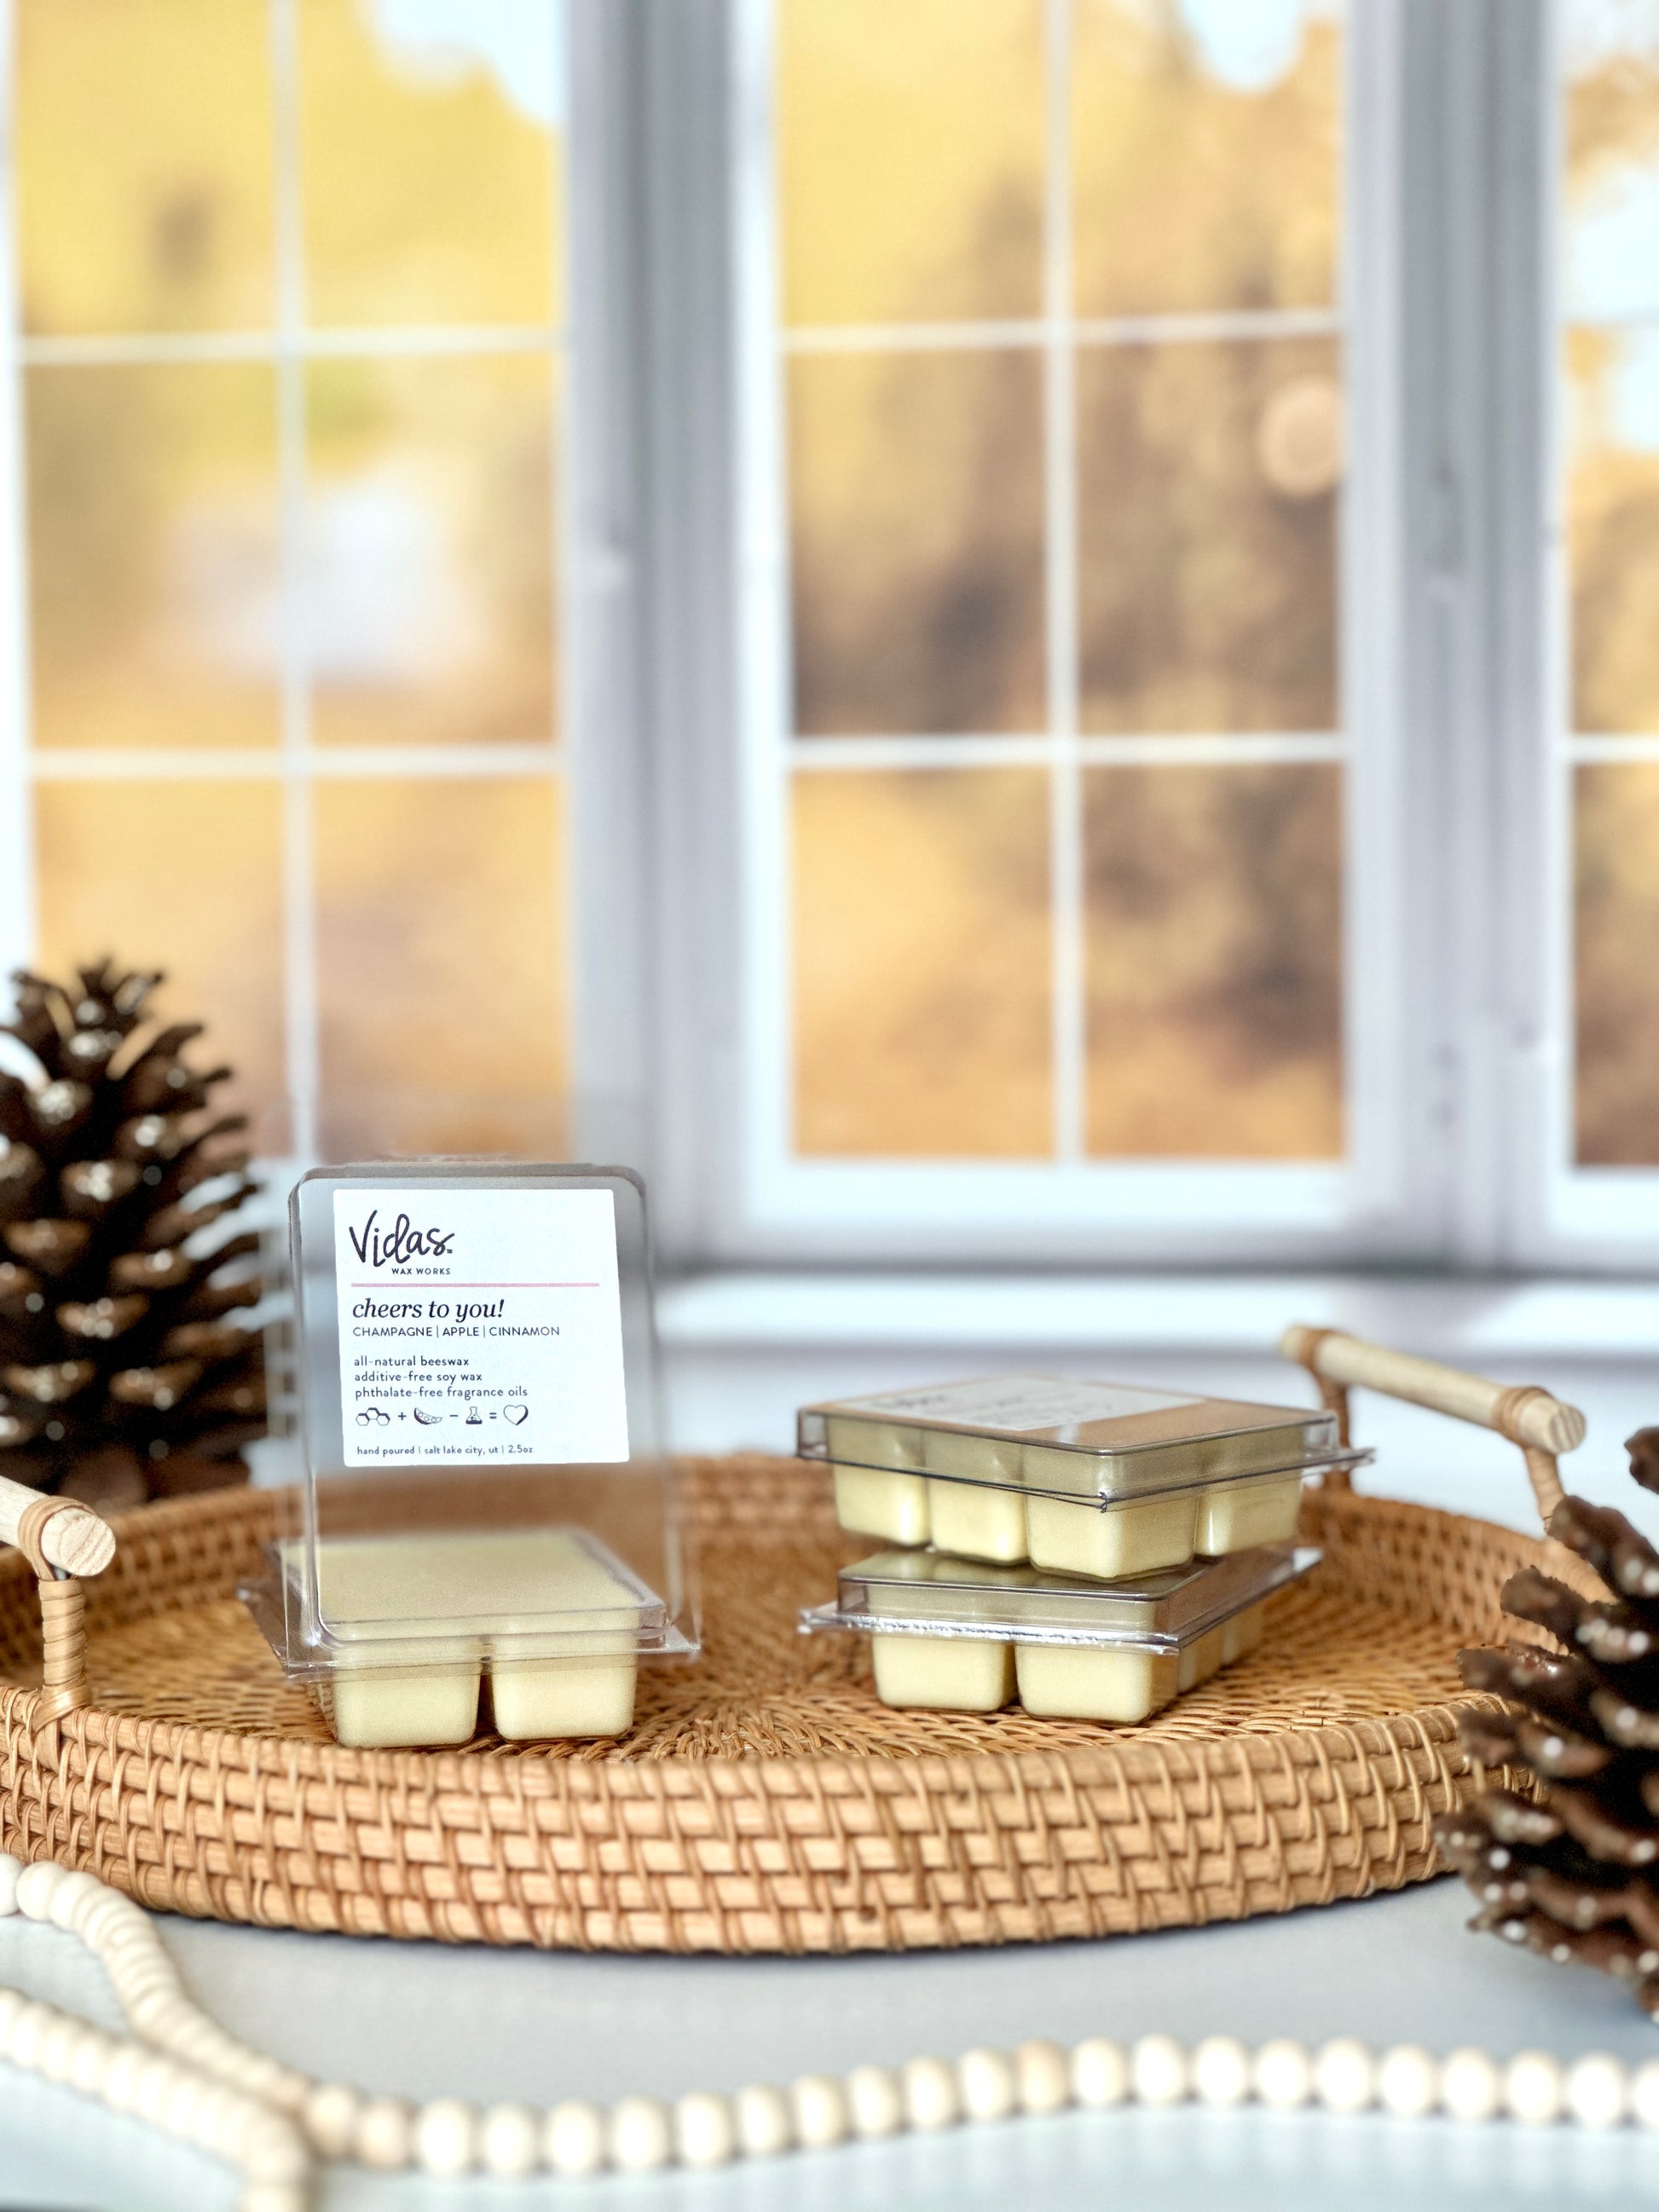 Indulge in the scent of fall: Champagne, apple, and cinnamon. A wicker serving tray cradles an open 2.5oz clamshell of wax melts, while pinecones and a string of decorative beads add rustic charm. A backdrop of blurred yellow fall leaves outside a window brings the season's ambiance to life.